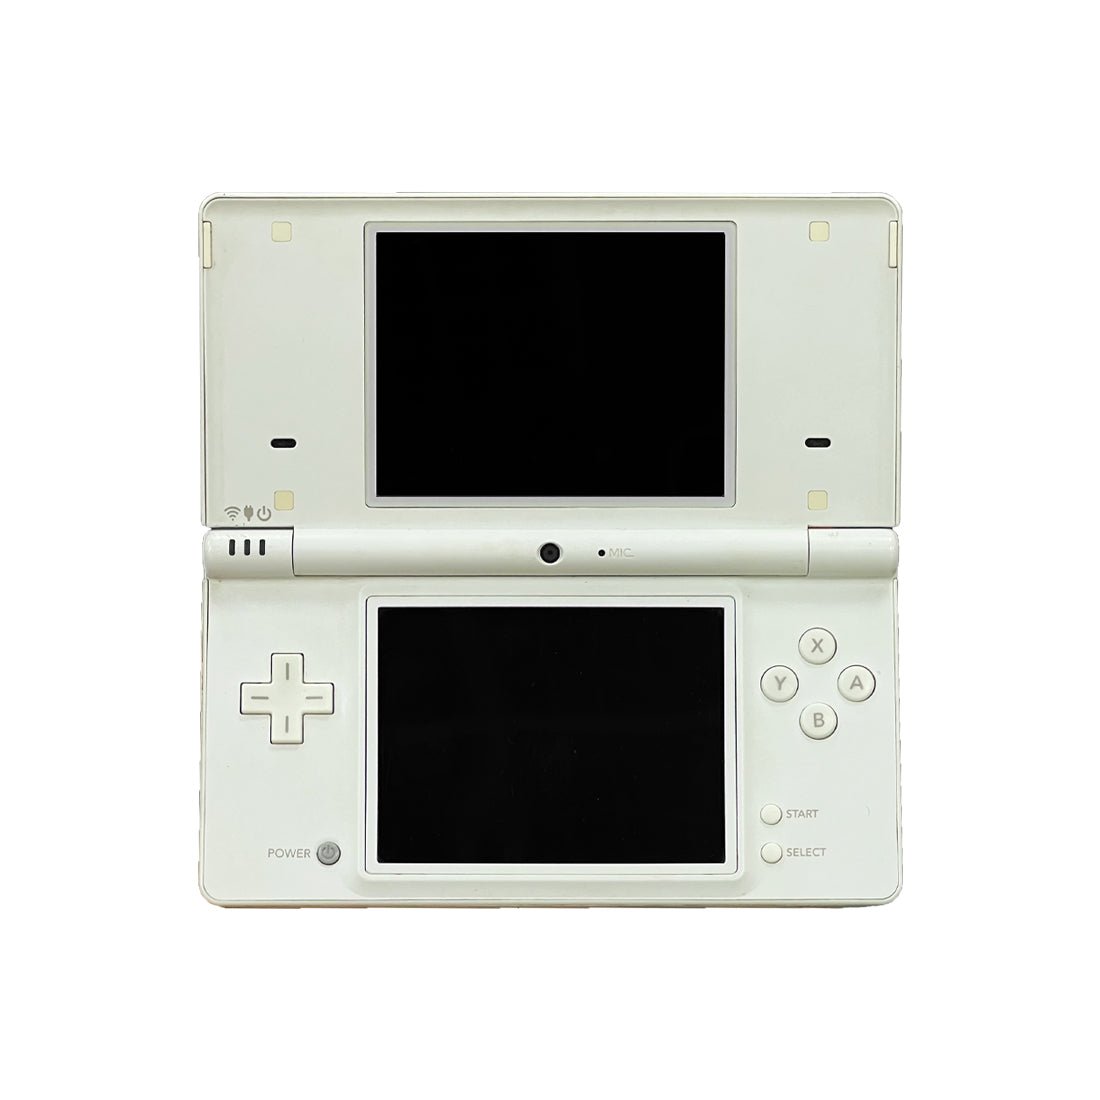 (Pre-Owned) Nintendo DSi Console - White - نينتندو مستعمل - Store 974 | ستور ٩٧٤